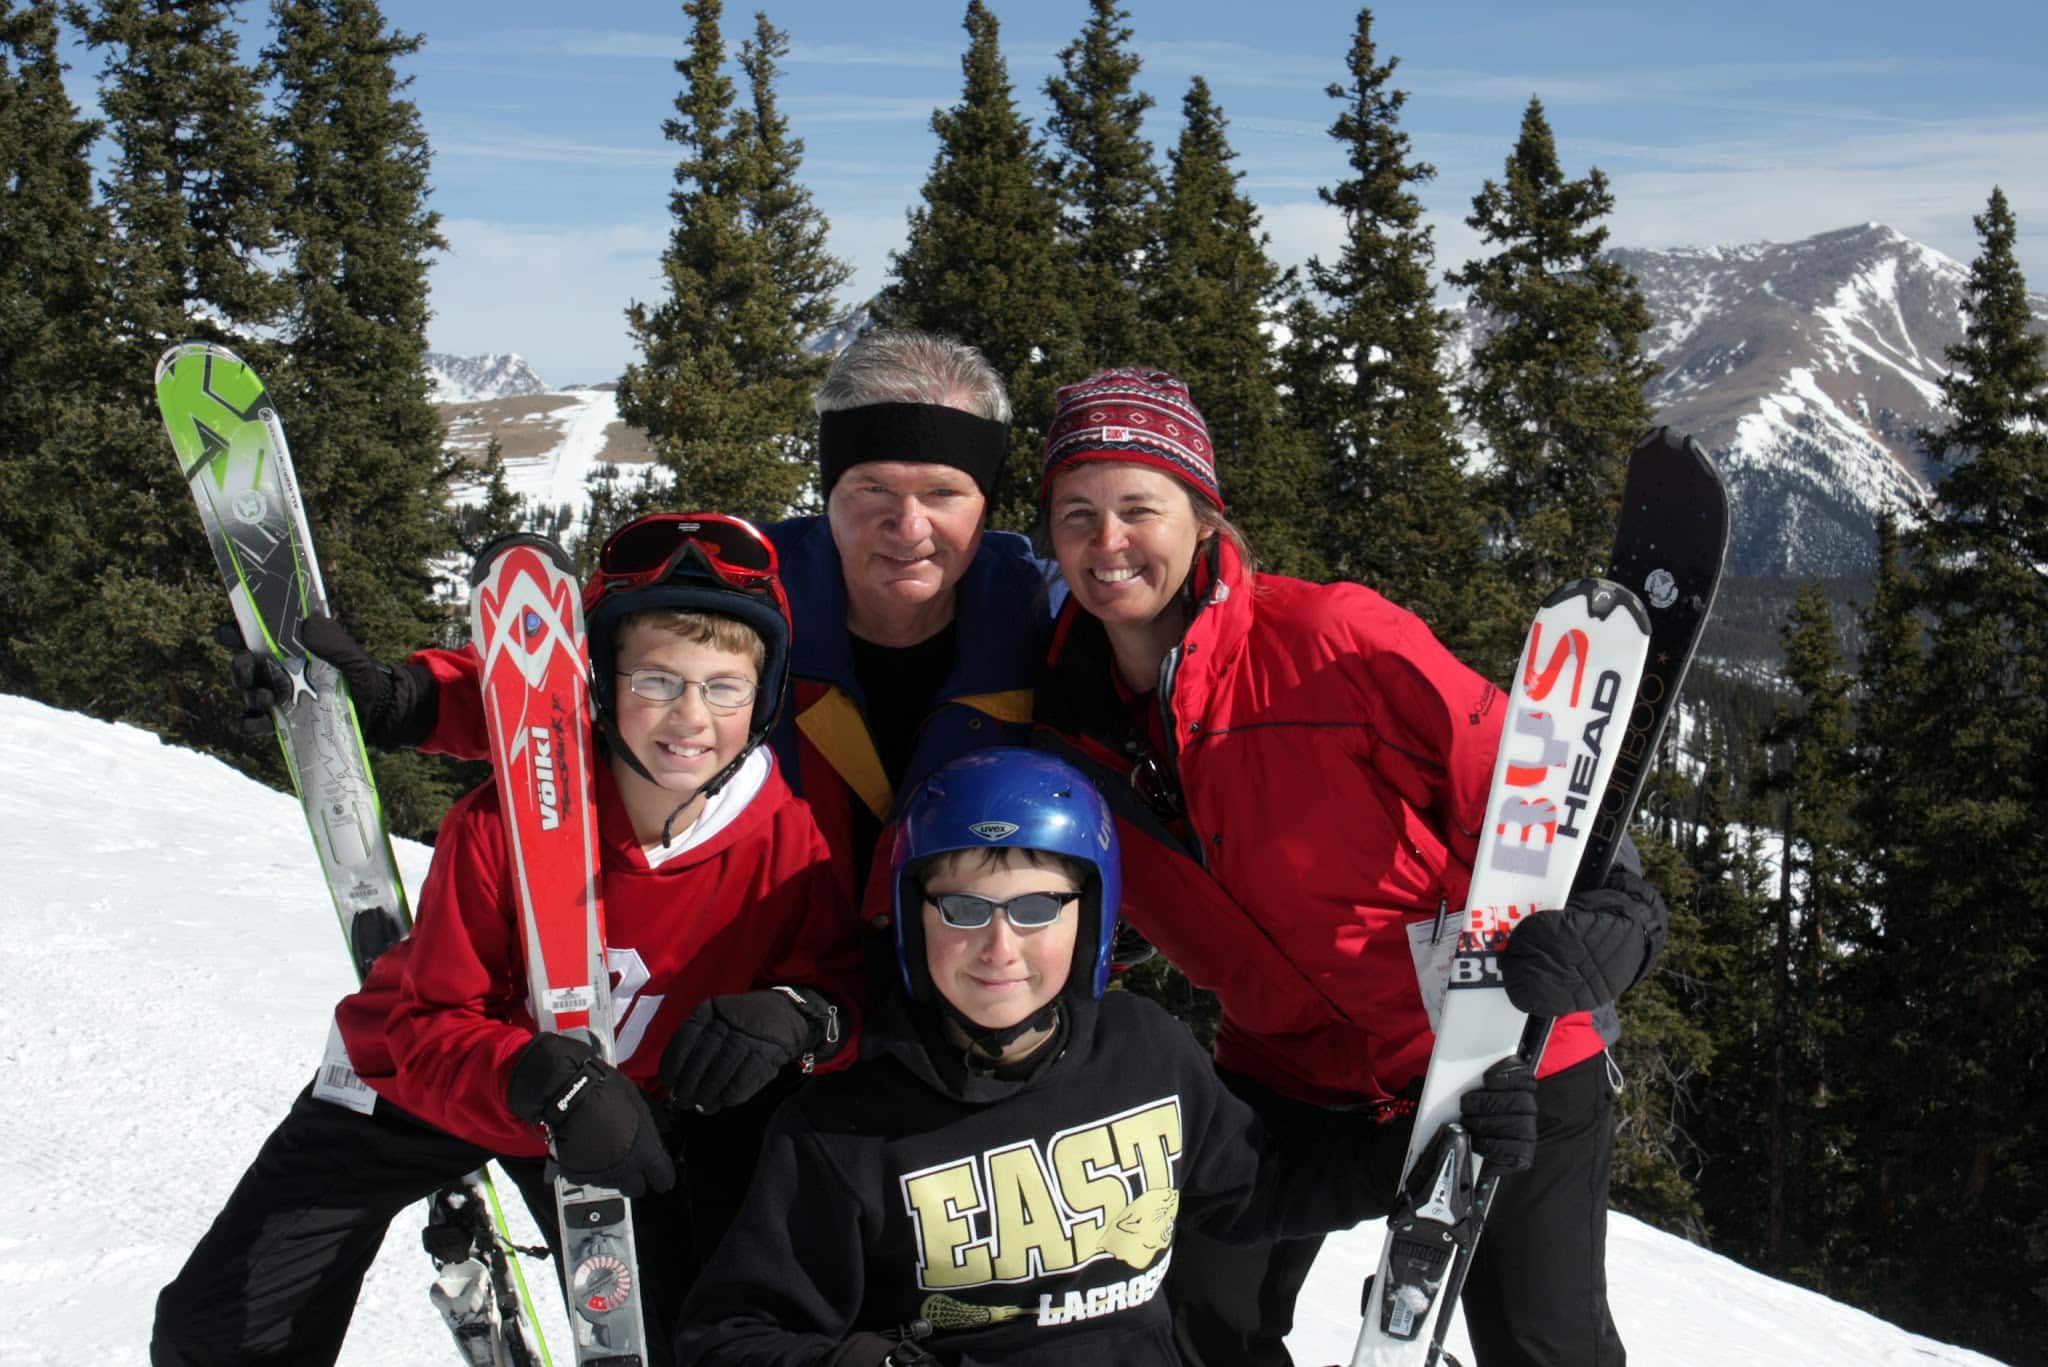 A family of four taking photos at a ski area with skis in hand.